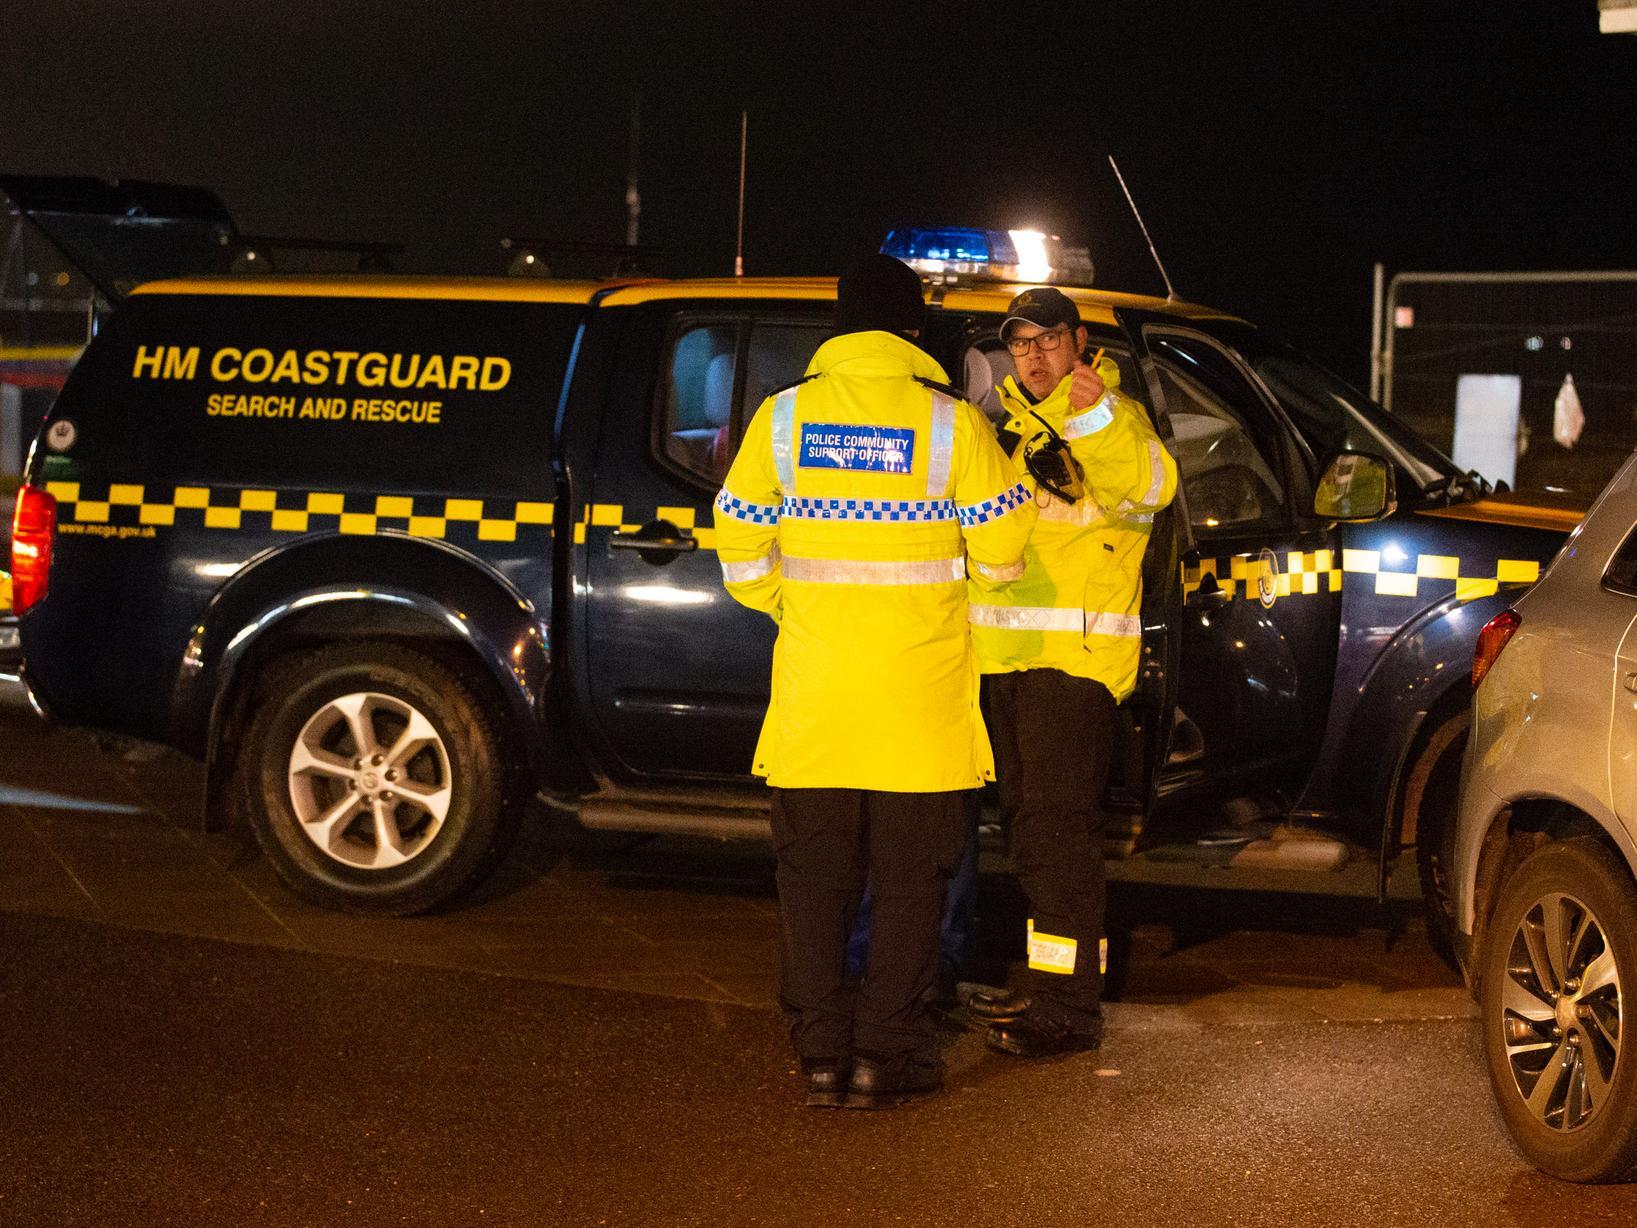 The search operation off the coast of Worthing last night (February 28)